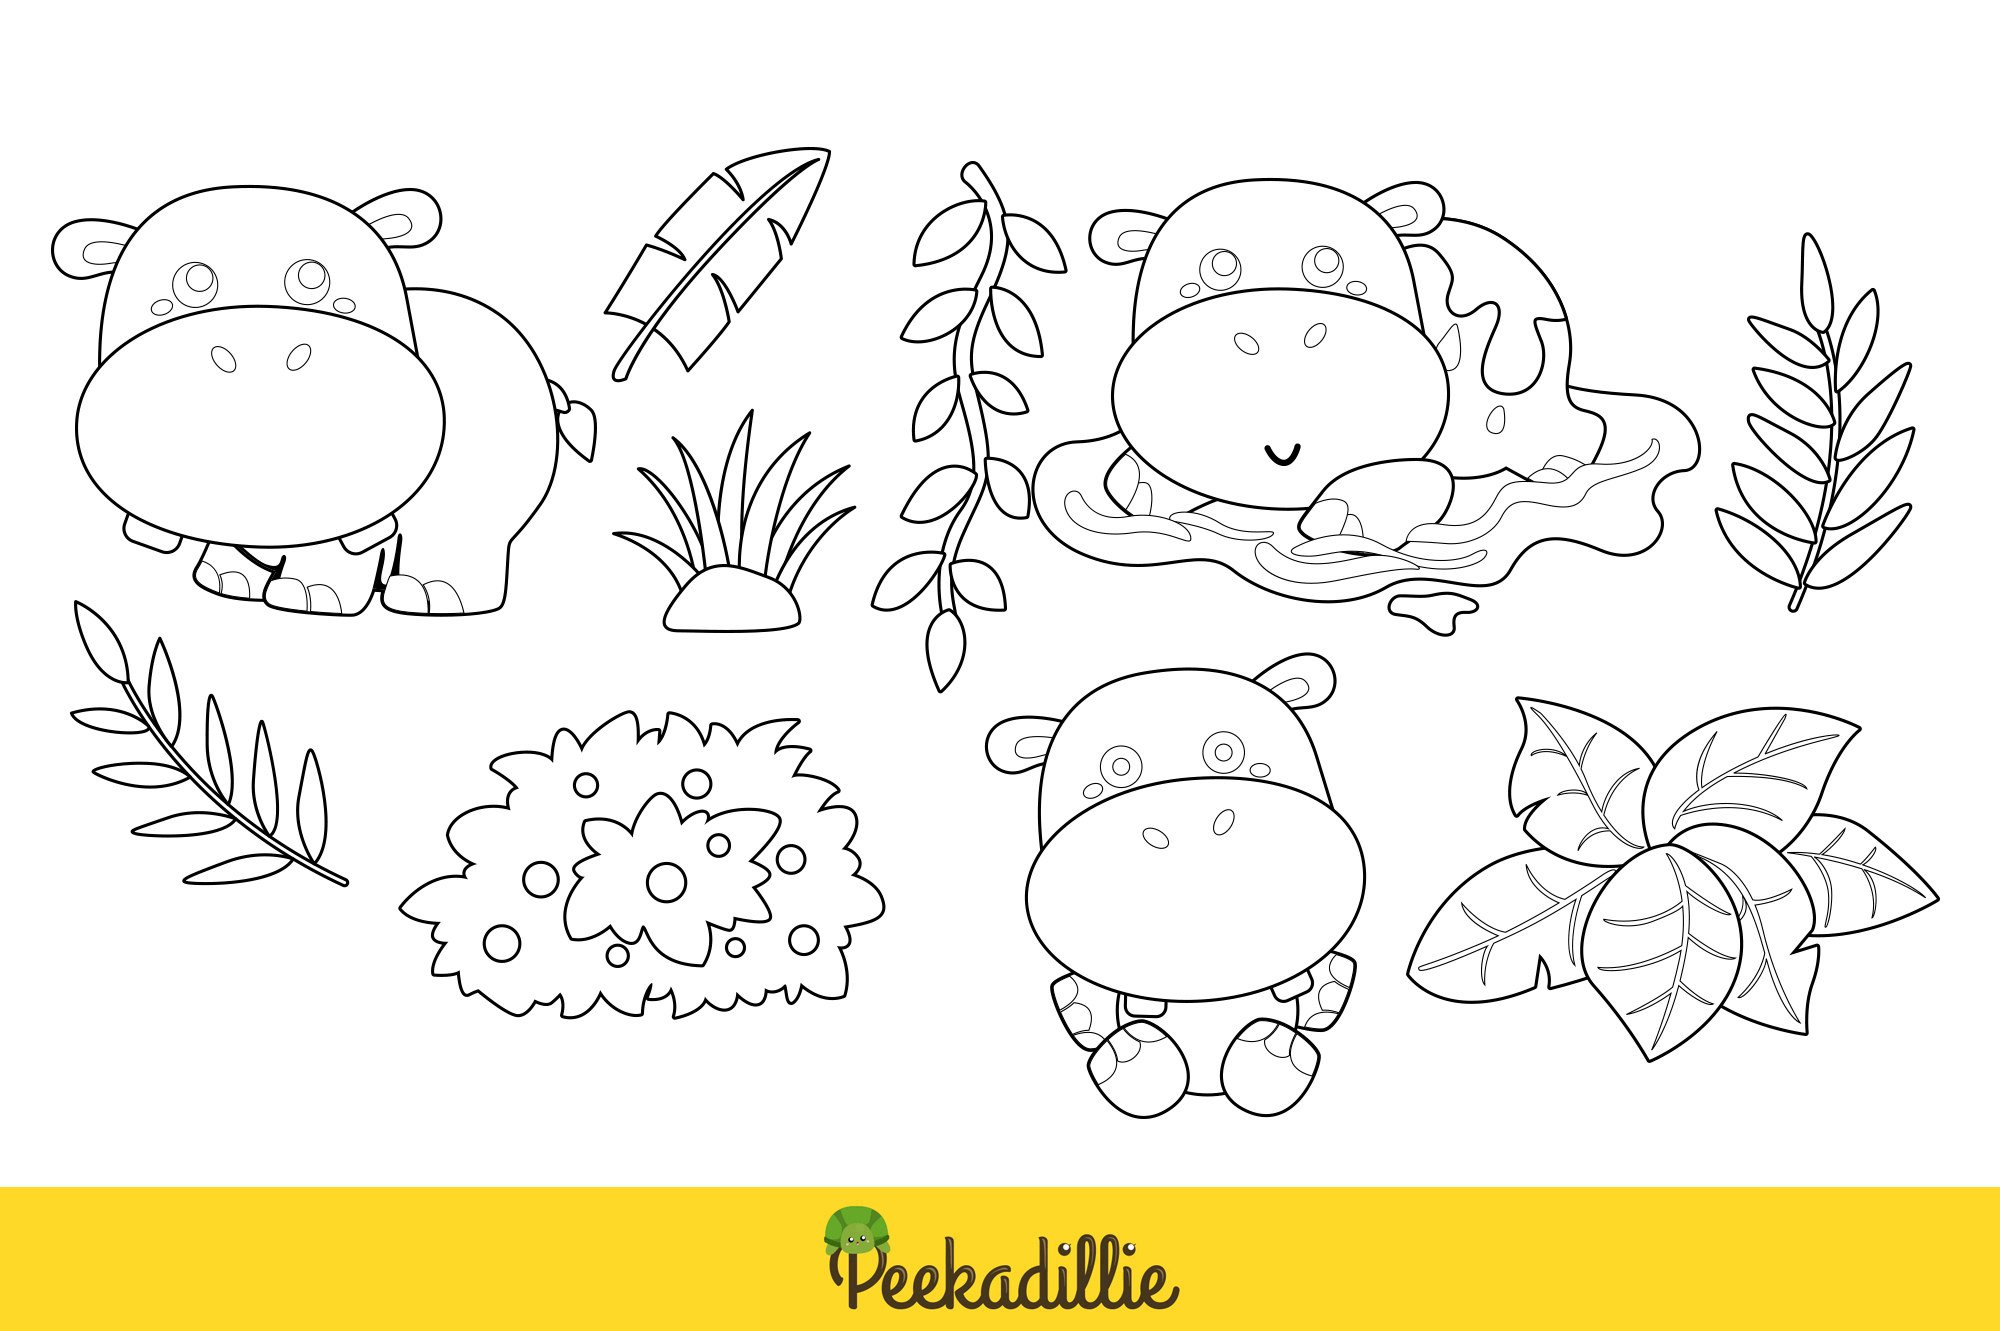 Coloring page with different animals and plants.